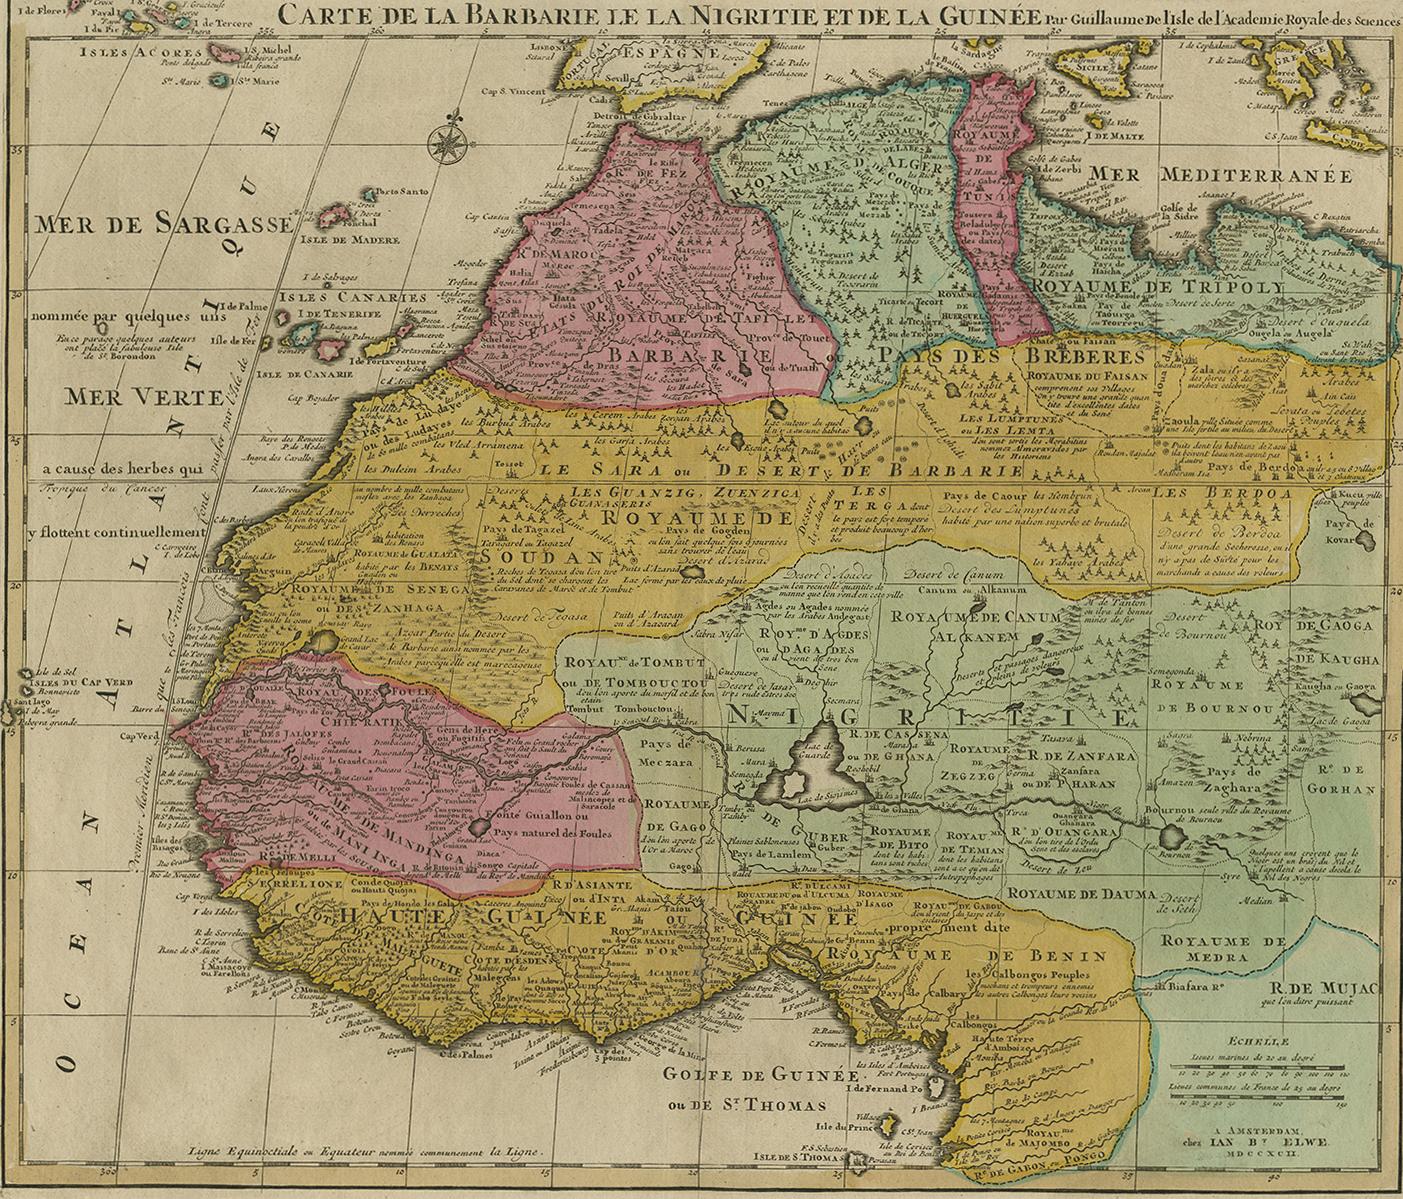 Beautiful richly engraved map of North and West Africa, based upon the earlier maps of De L'Isle. Richly annotated throughout and with excellent regional detail. Too much detail to describe. The engraving quality reflects the fine work of Elwe, who